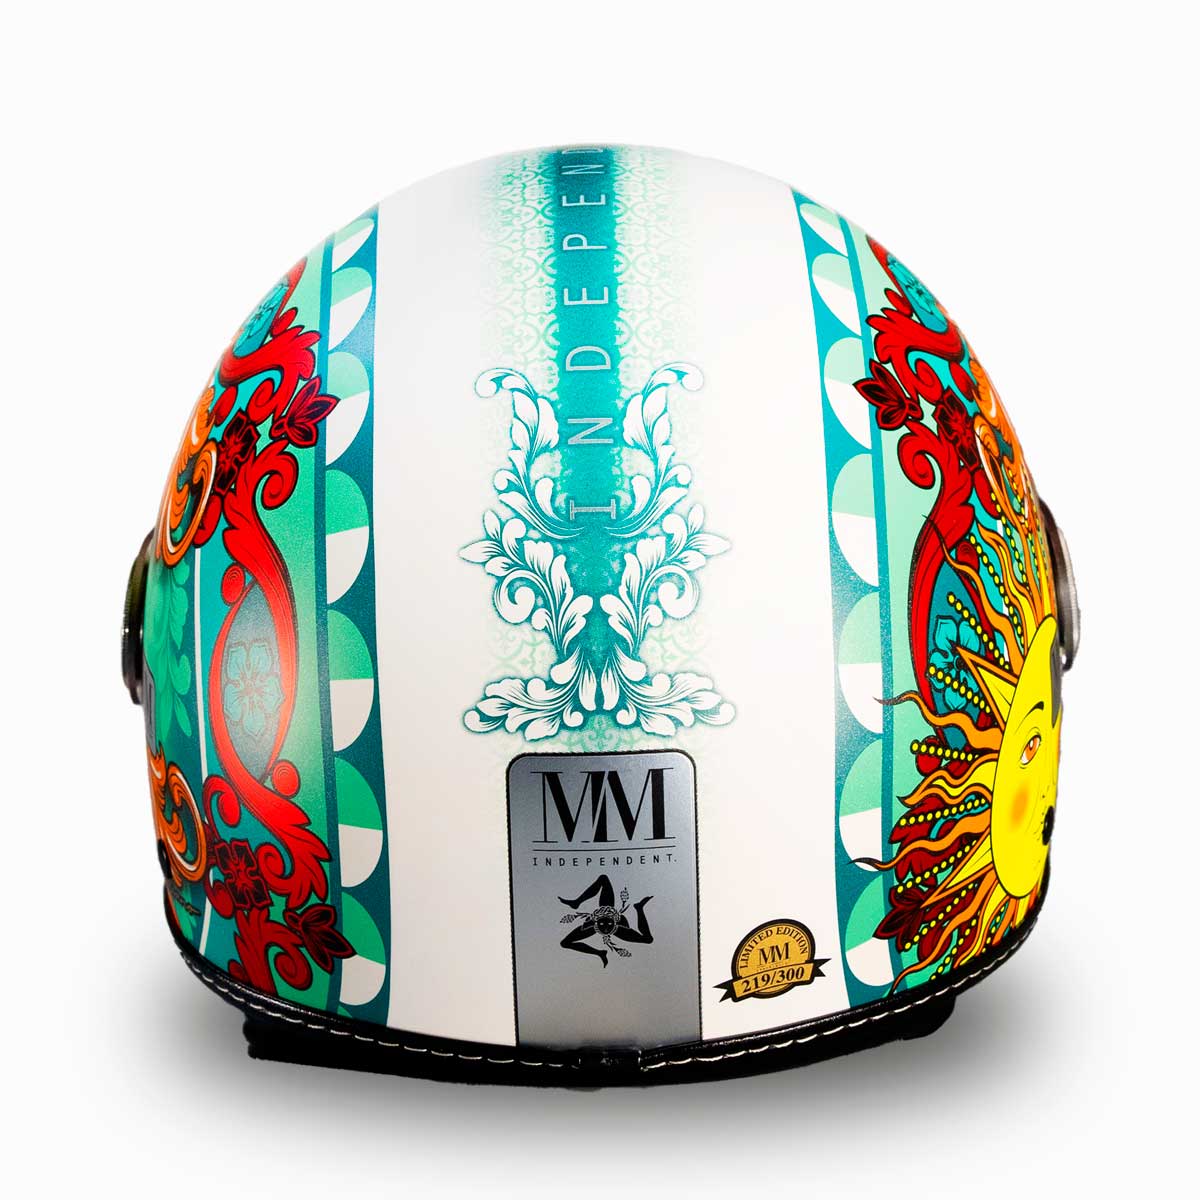 Helmet Sicily Magnolia Green LIMITED EDITION MM Independent